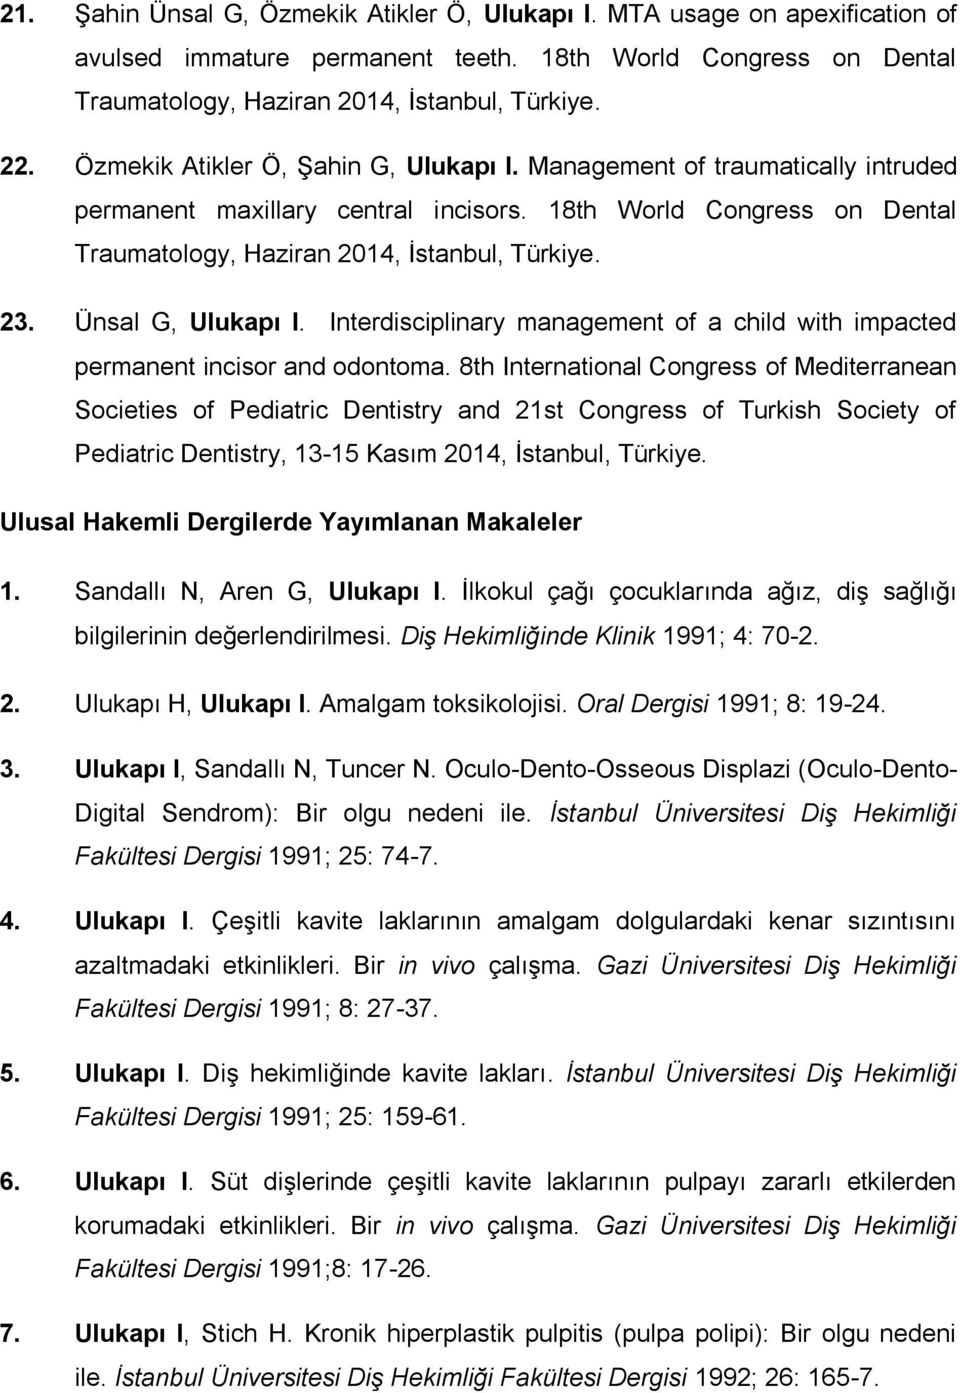 Ünsal G, Ulukapı I. Interdisciplinary management of a child with impacted permanent incisor and odontoma.